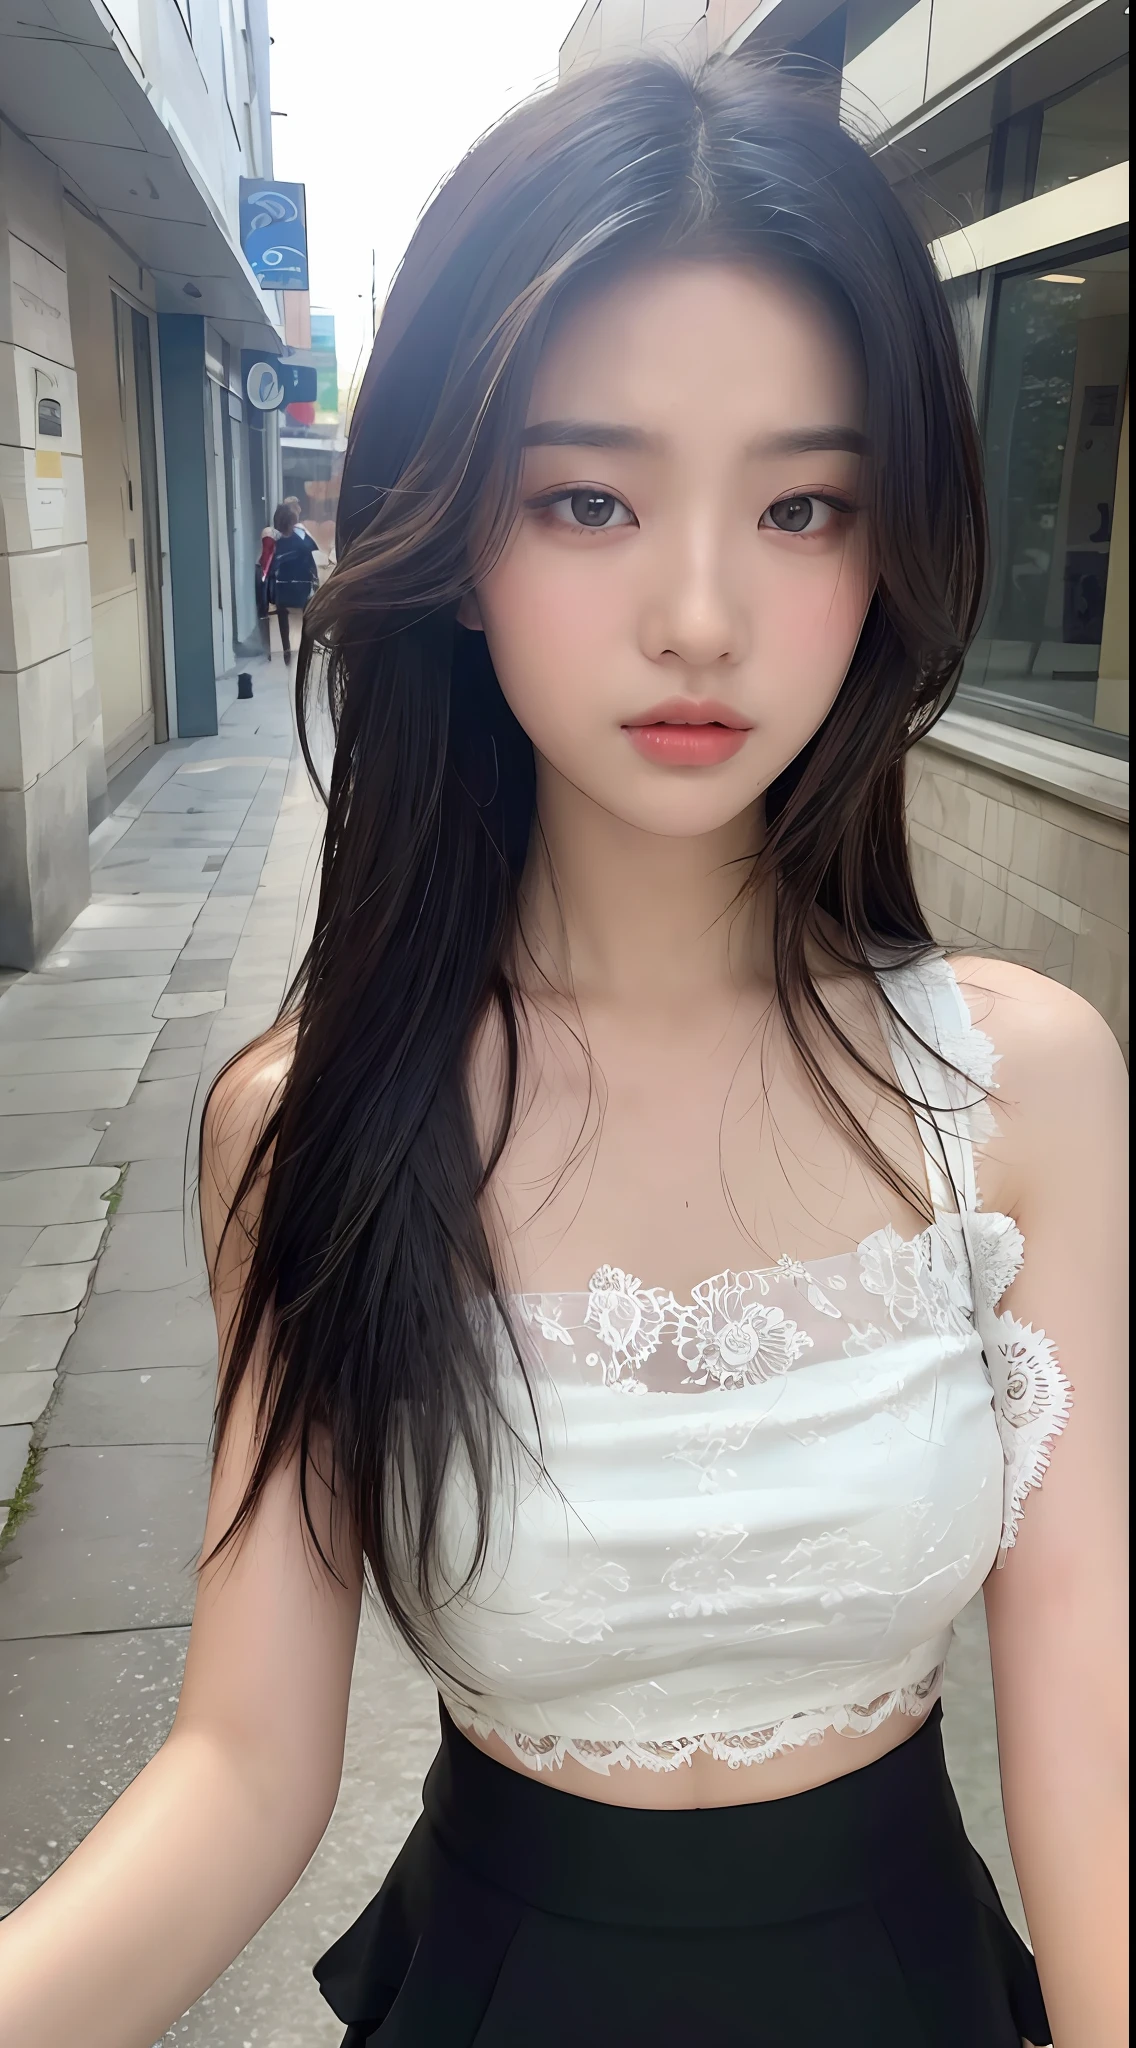 ((Best Quality, 8K, Masterpiece: 1.3)), Sharp: 1.2, Perfect Body Beauty: 1.4, Slim Abs: 1.2, ((Layered Hairstyle, :1.2)), (Lace Top with Skirt: 1.3), (Street: 1.2), Wet: 1.5, Highly detailed face and skin texture, Fine eyes, double eyelids, looking directly at the camera